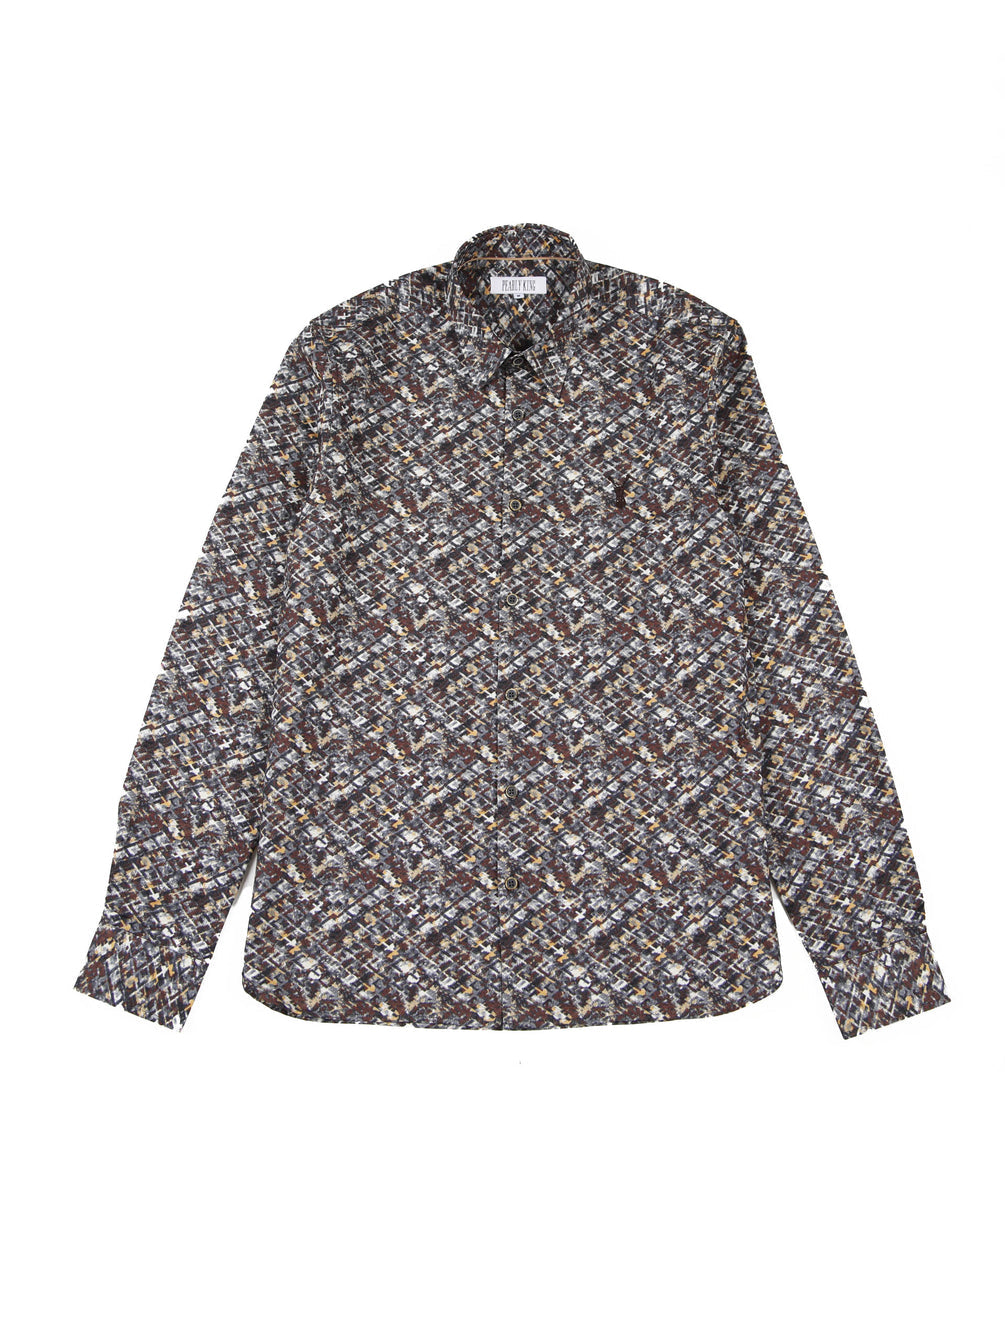 Pearly King - Obey LS Shirt - Beige/Rust